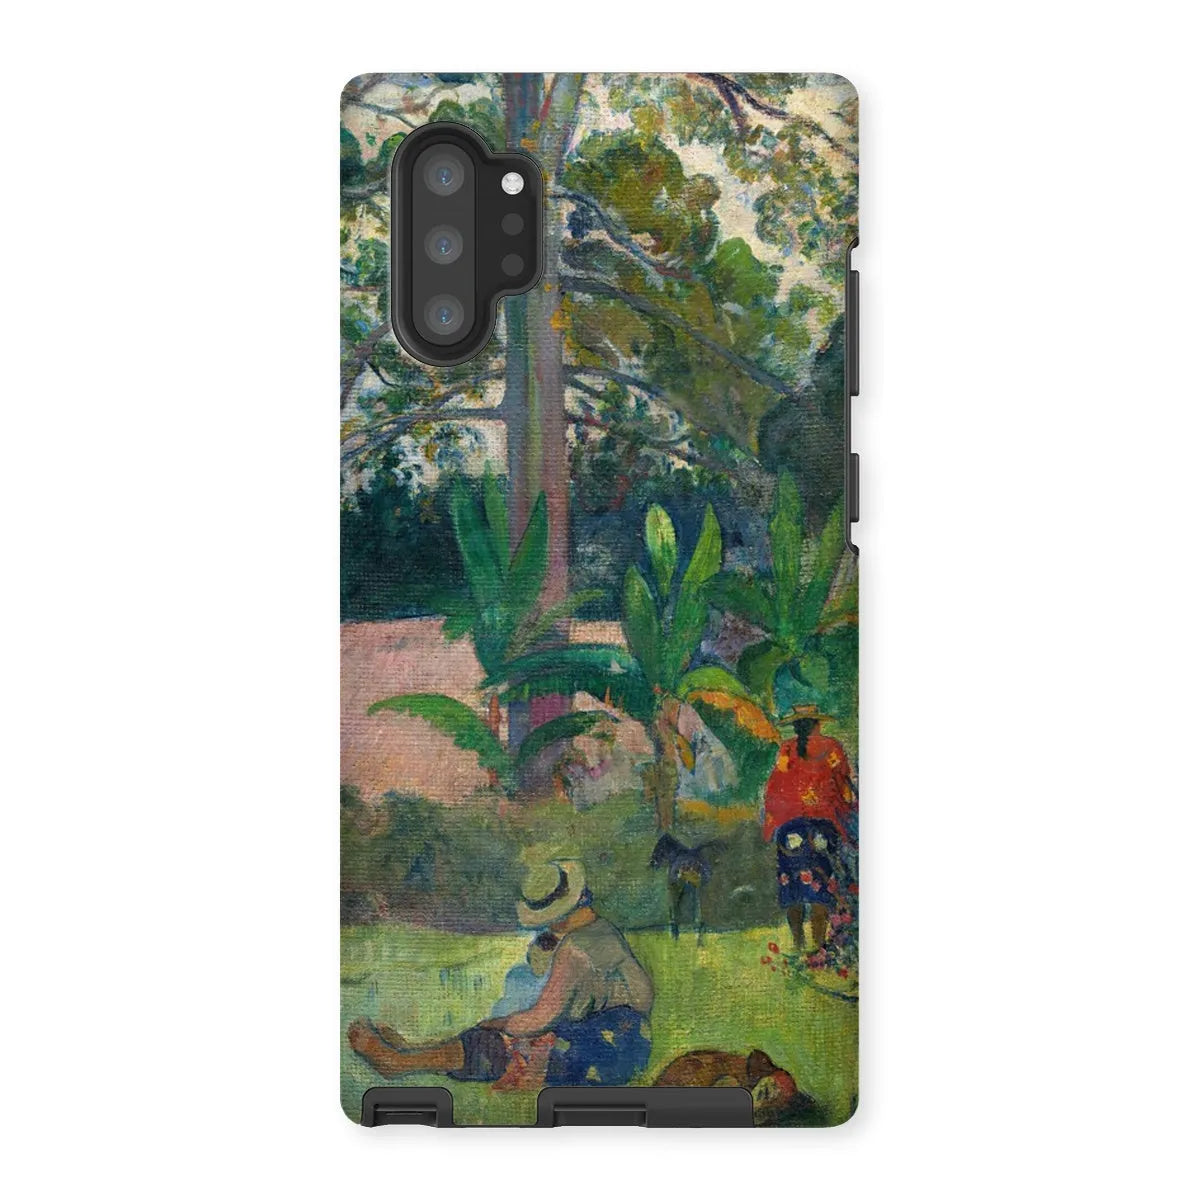 The Big Tree - Post-impressionist Phone Case - Paul Gauguin - Samsung Galaxy Note 10p / Matte - Mobile Phone Cases